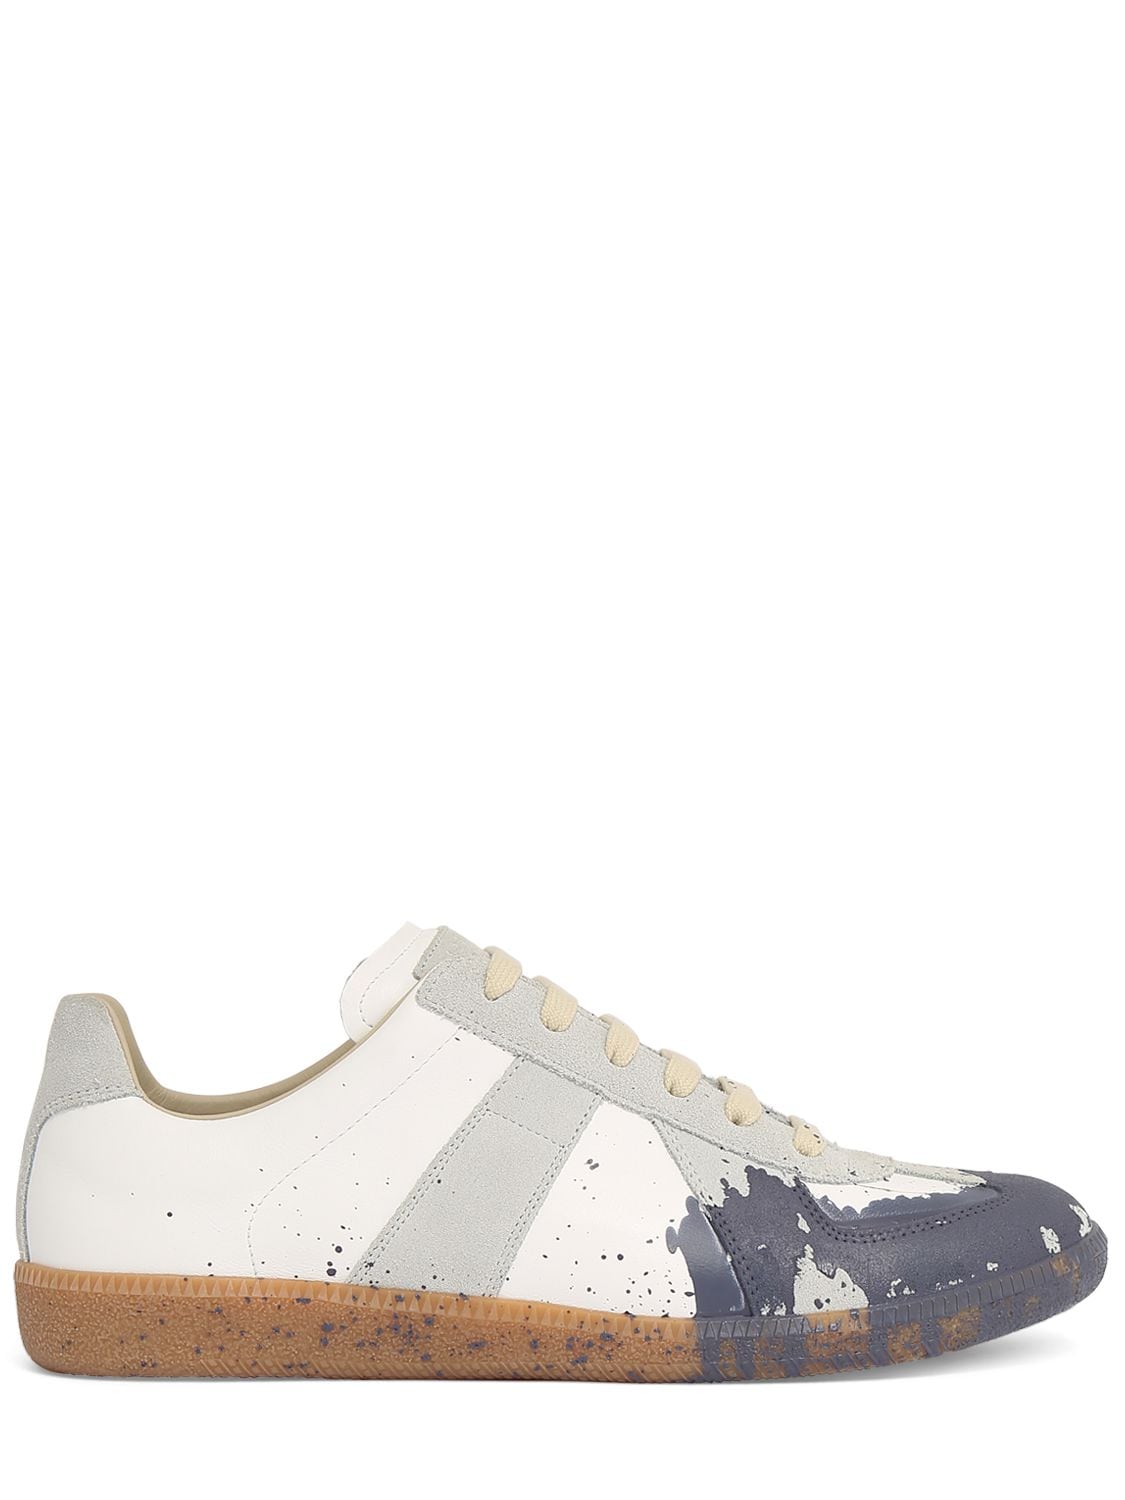 Image of Replica Painted Leather Low Top Sneakers